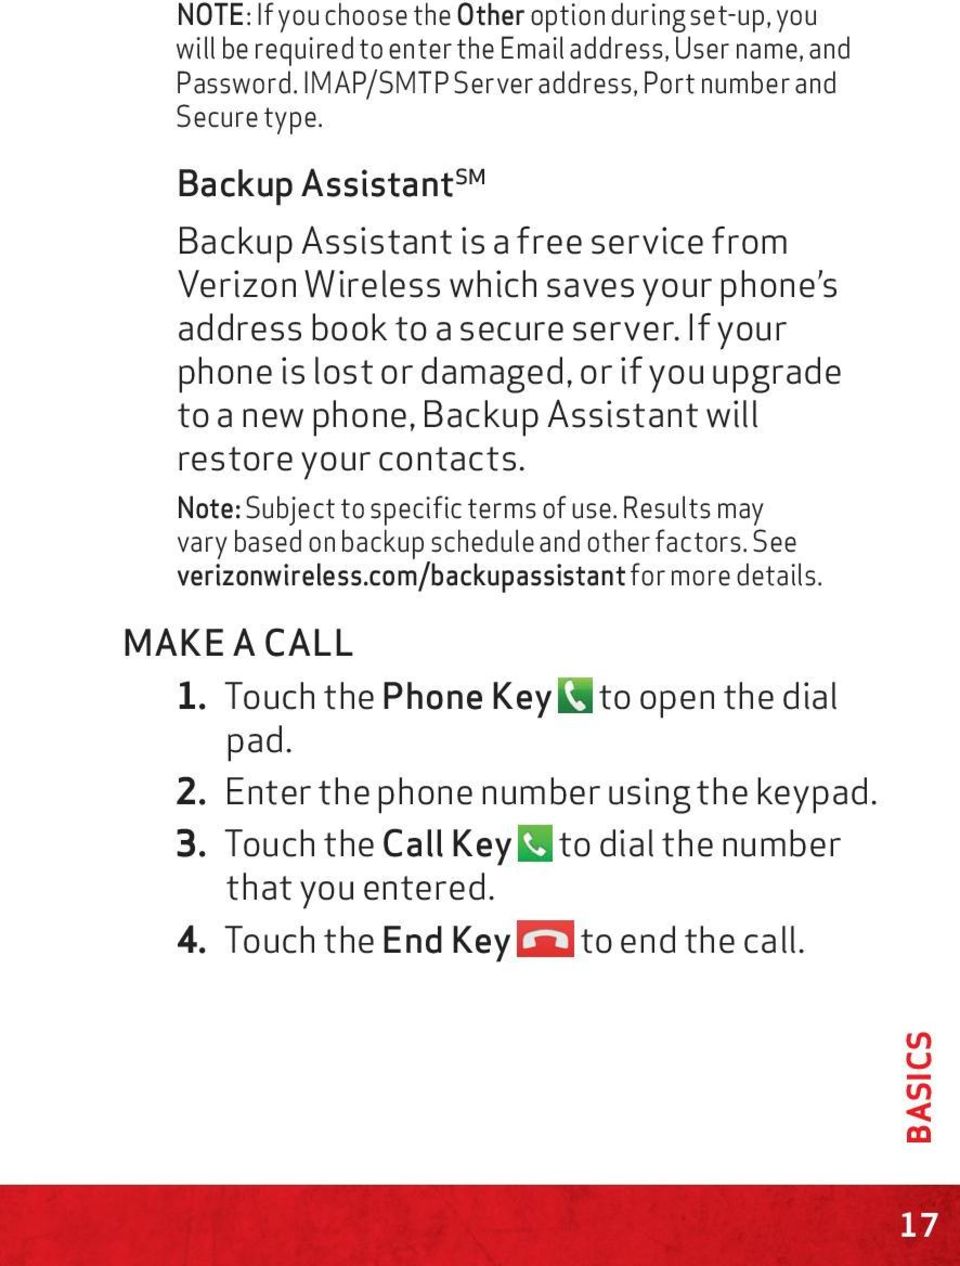 If your phone is lost or damaged, or if you upgrade to a new phone, Backup Assistant will restore your contacts. Note: Subject to specific terms of use.